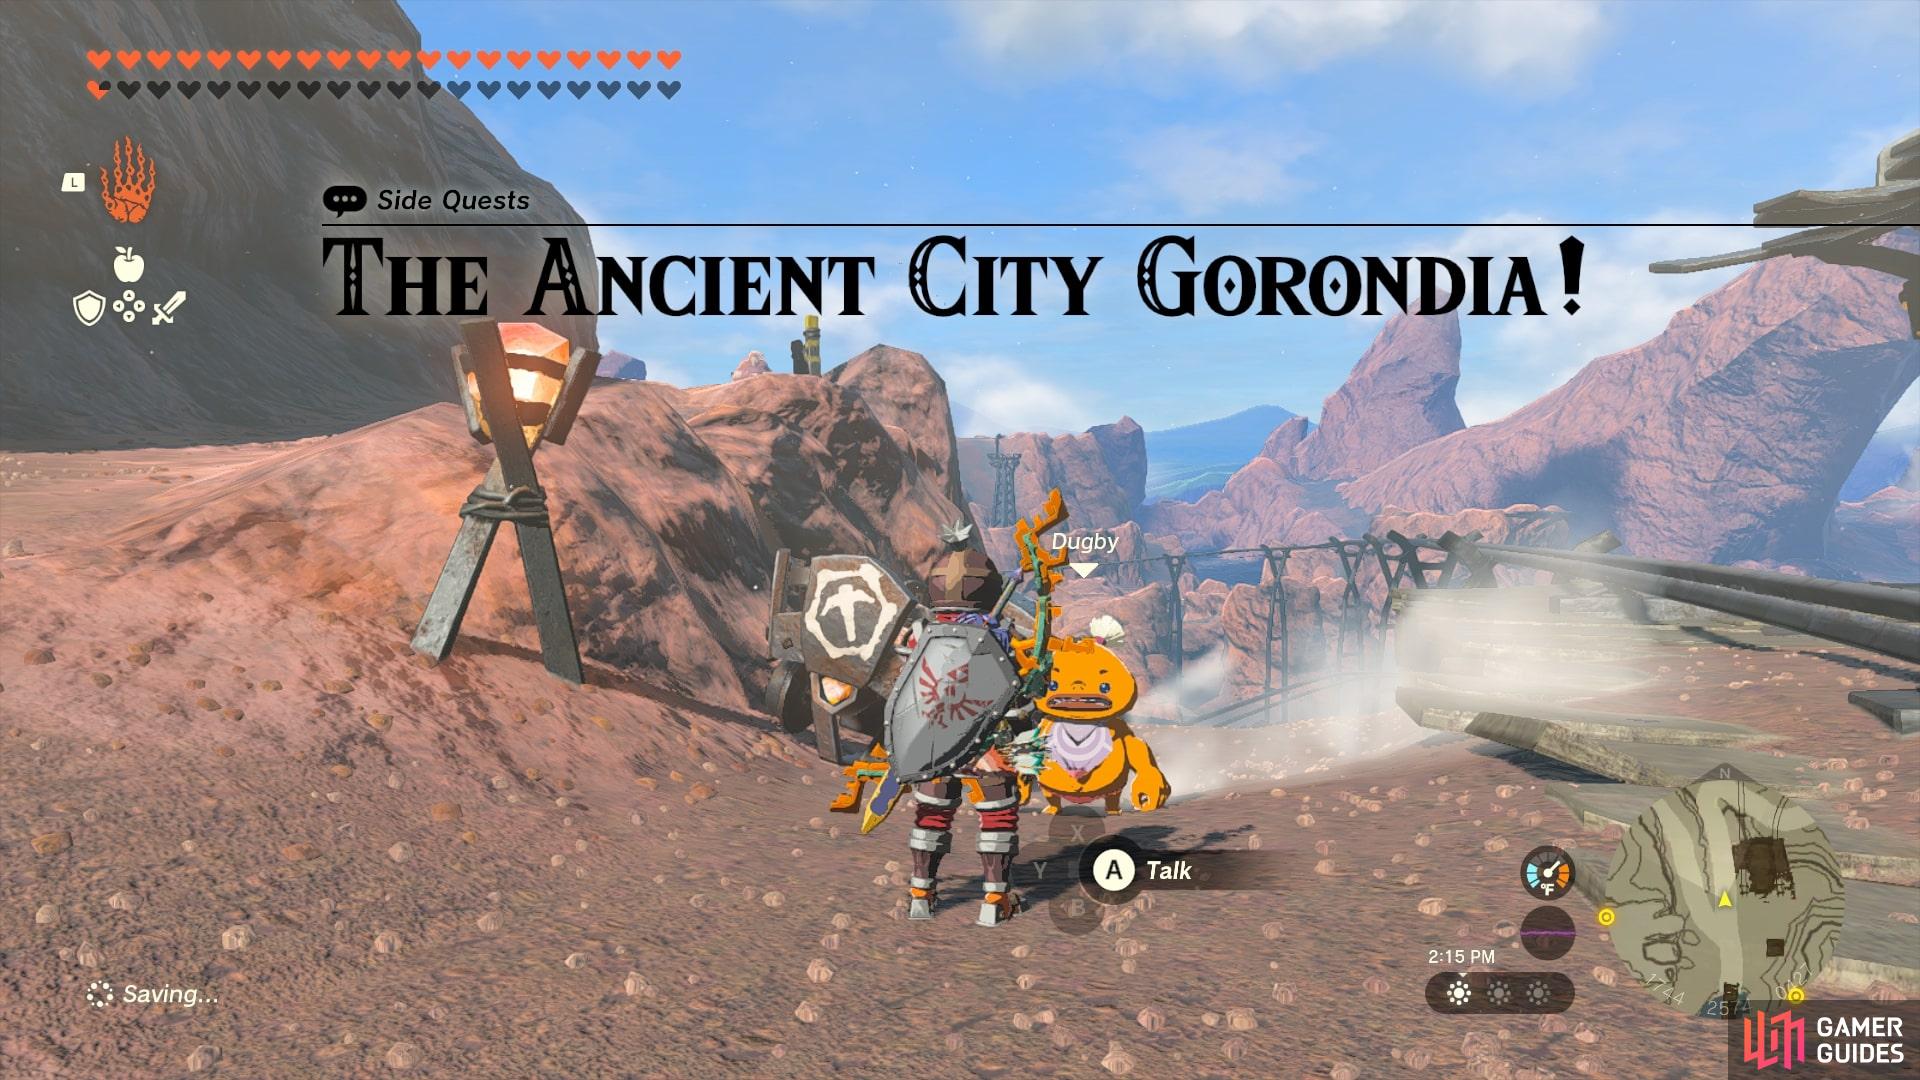 Speak with Dugby to start The Ancient City Gorondia quest line.